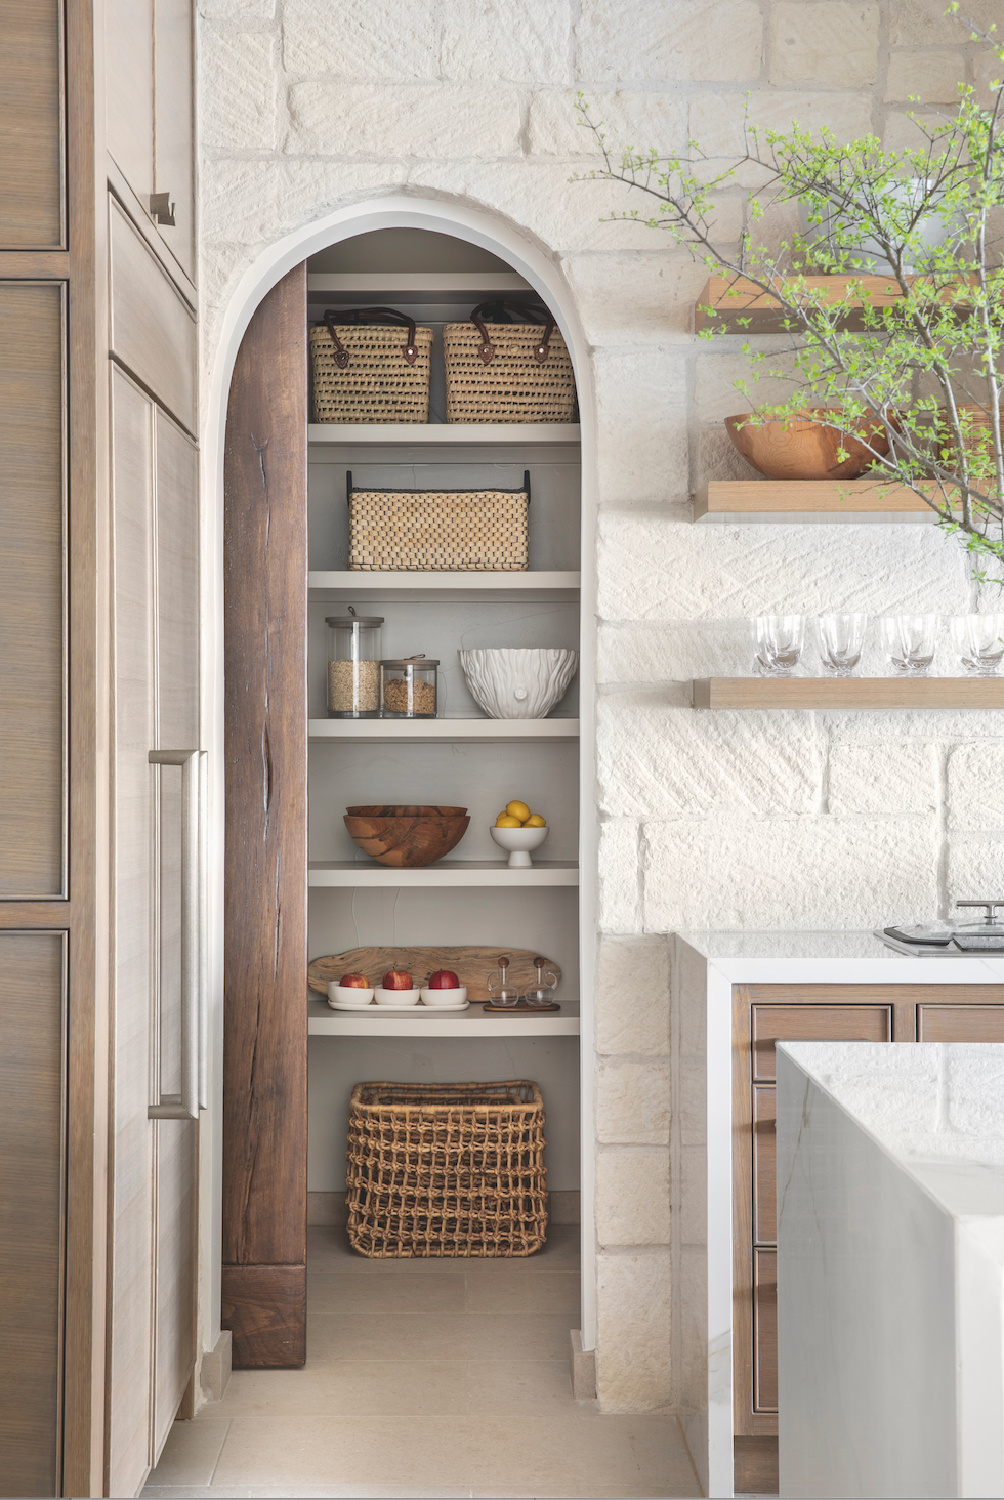 Timeless kitchen design with arched pantry in Marie Flanigan's THE BEAUTY OF HOME: Redefining Traditional Interiors (Gibbs Smith, 2020).